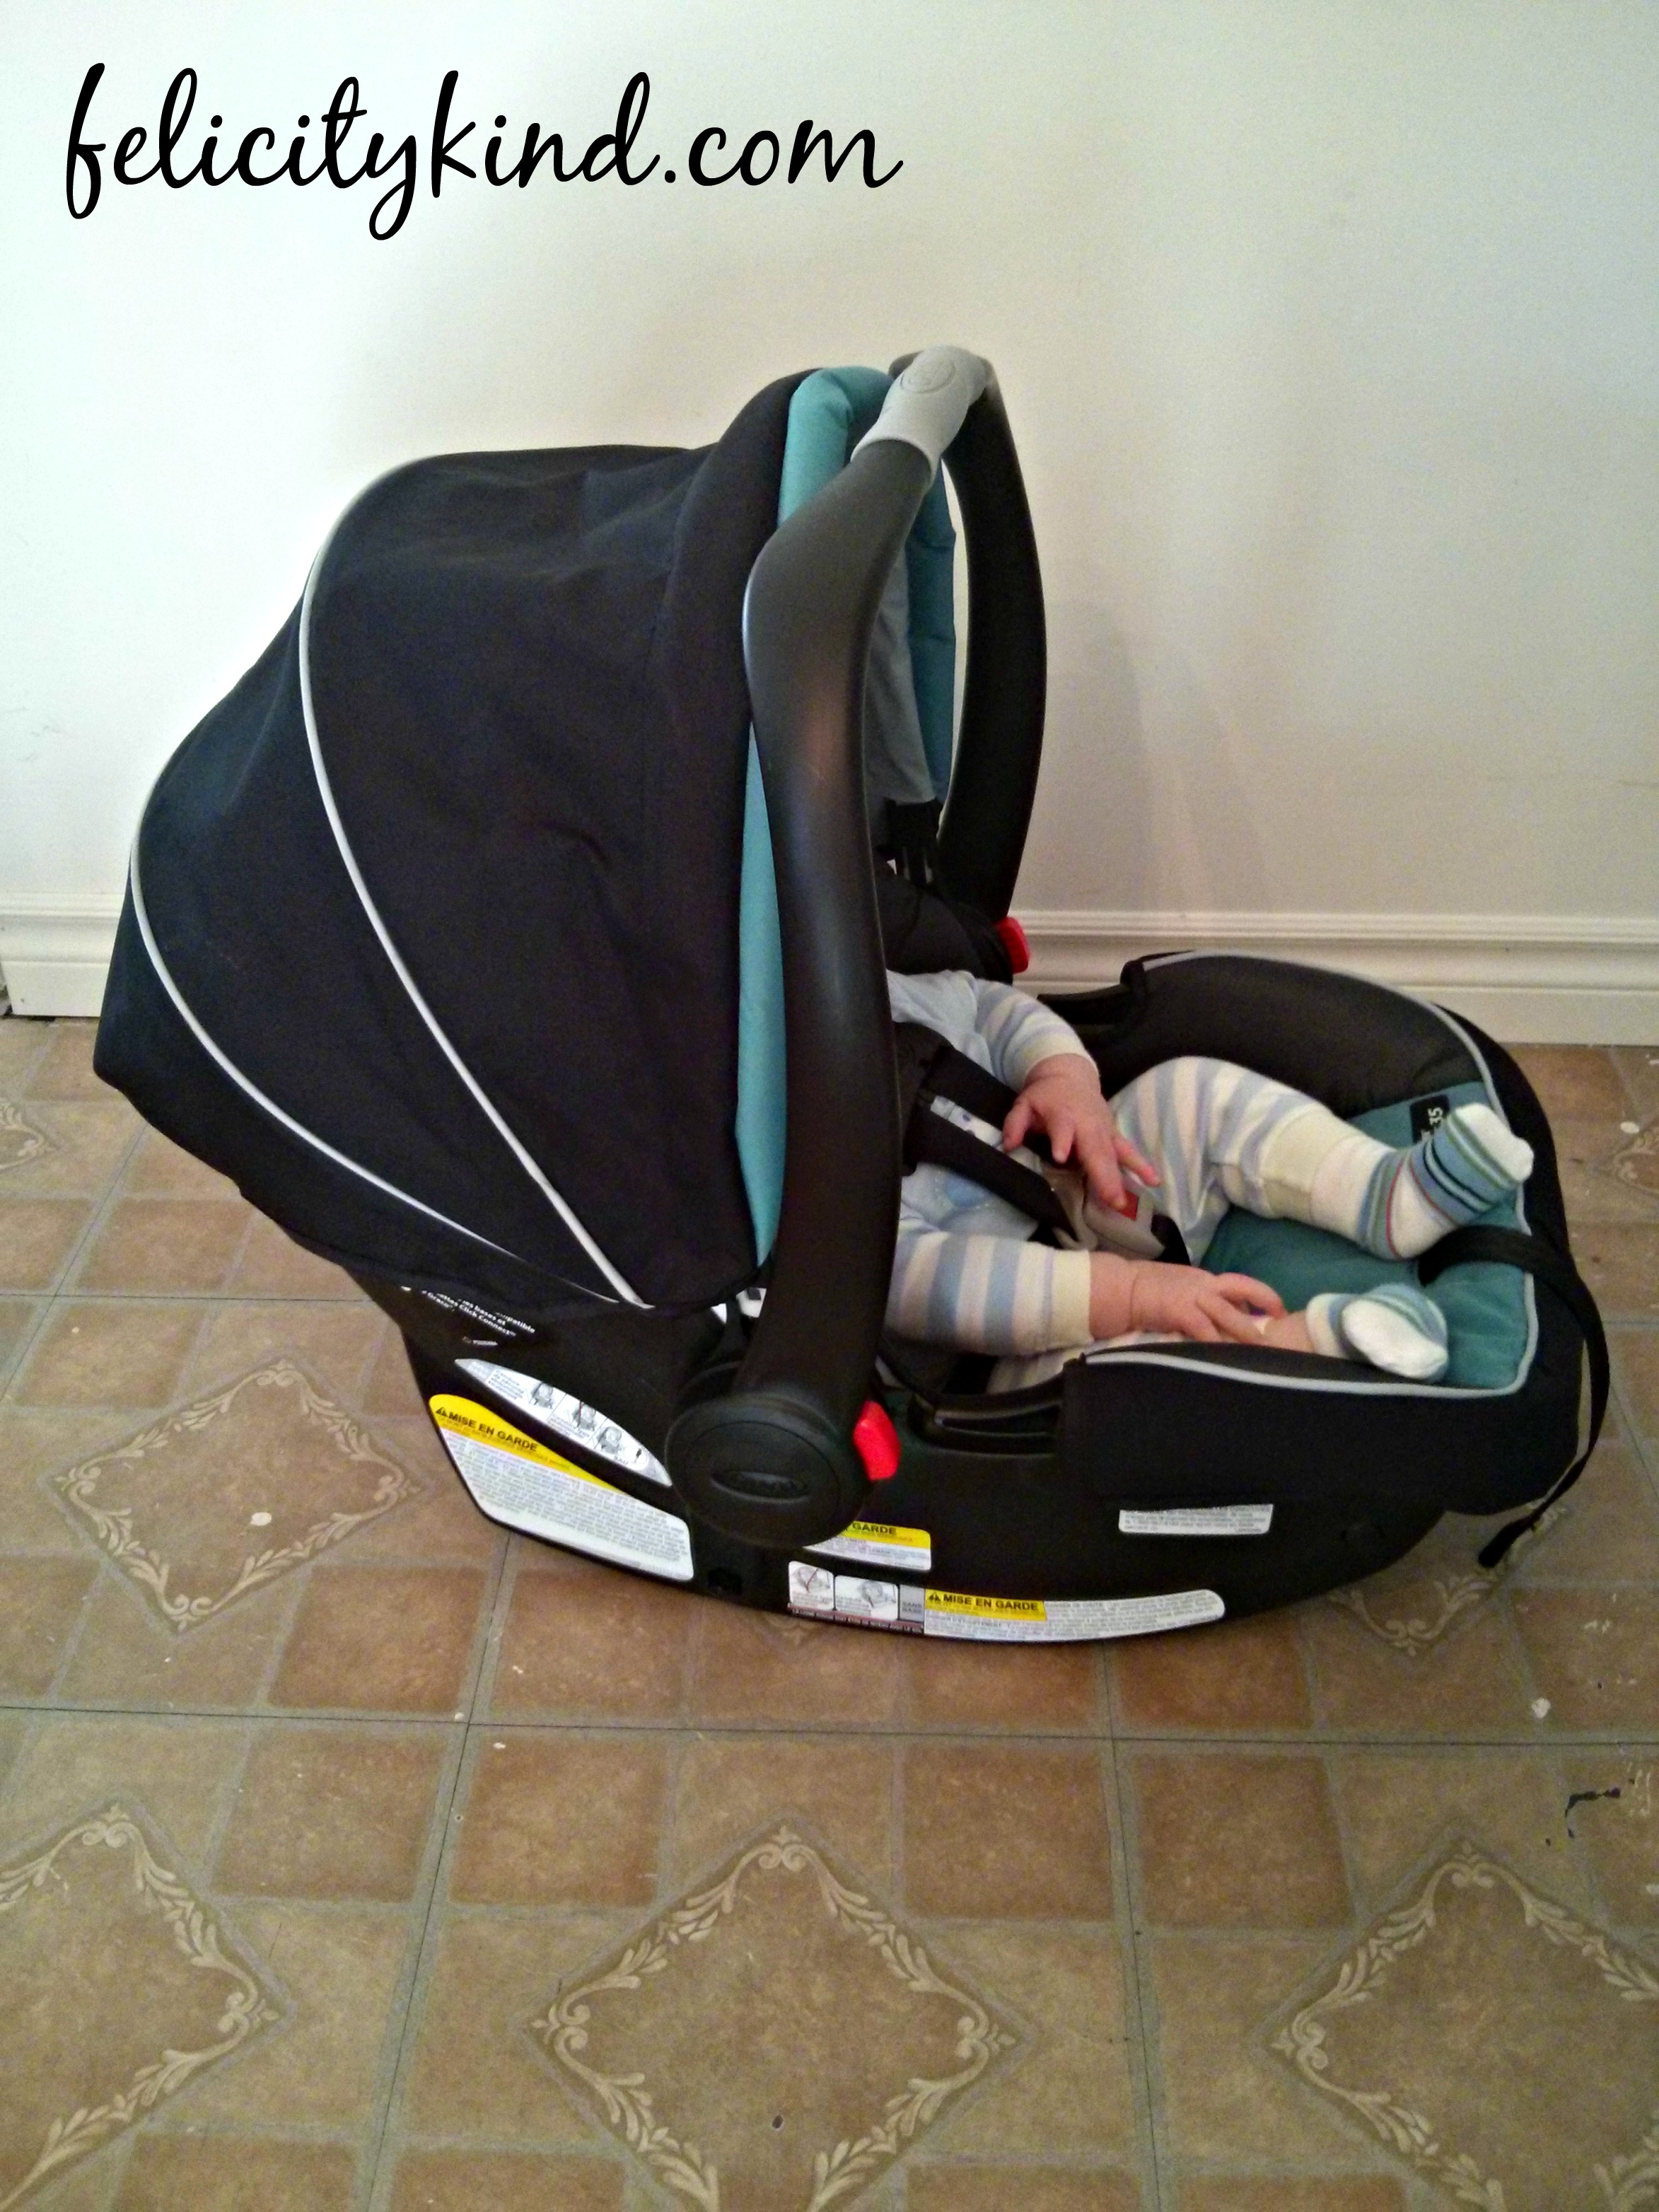 snugride click connect 35 travel system